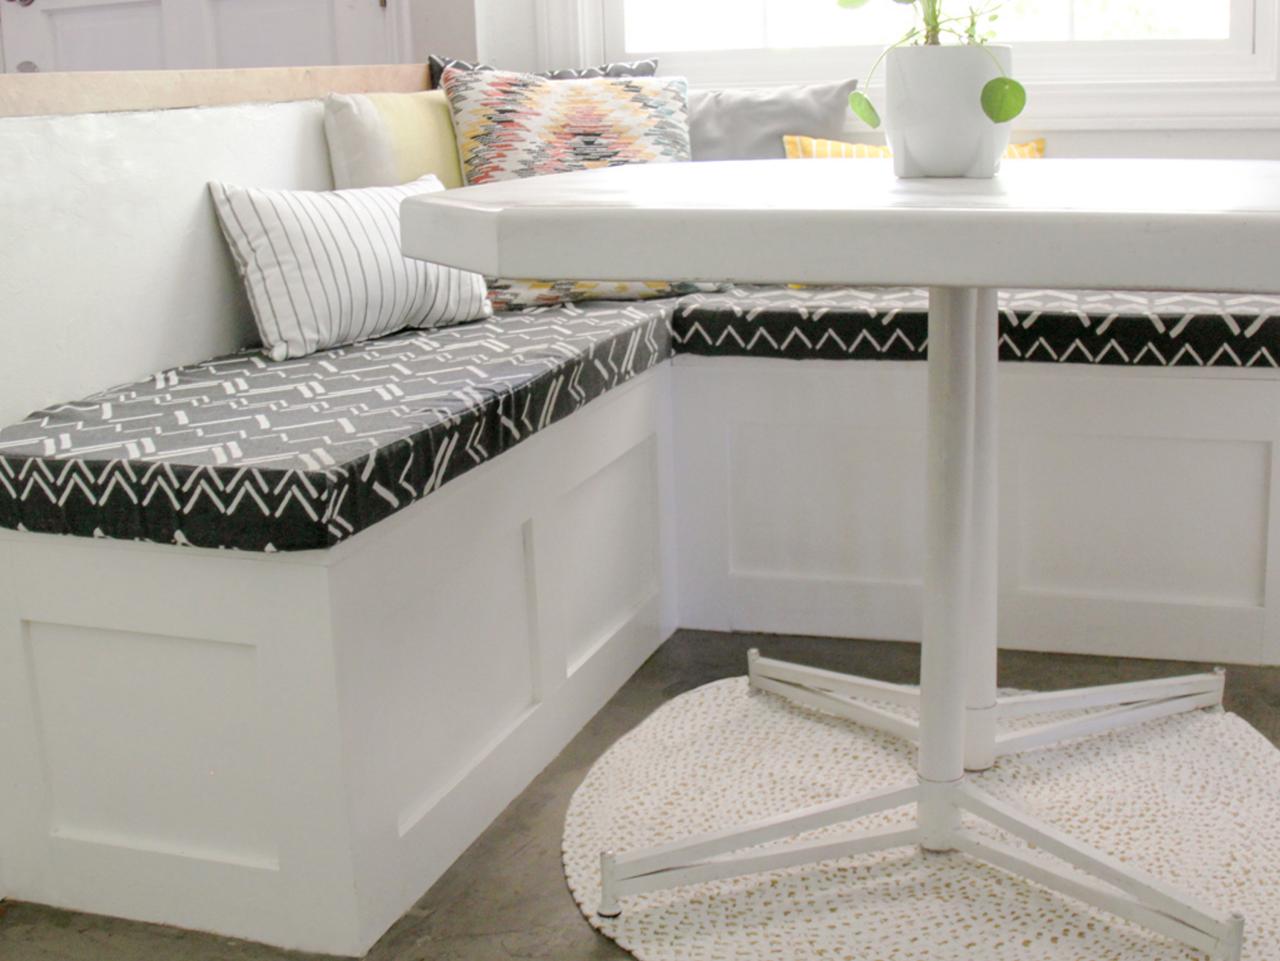 Diy Banquette Seating With Storage